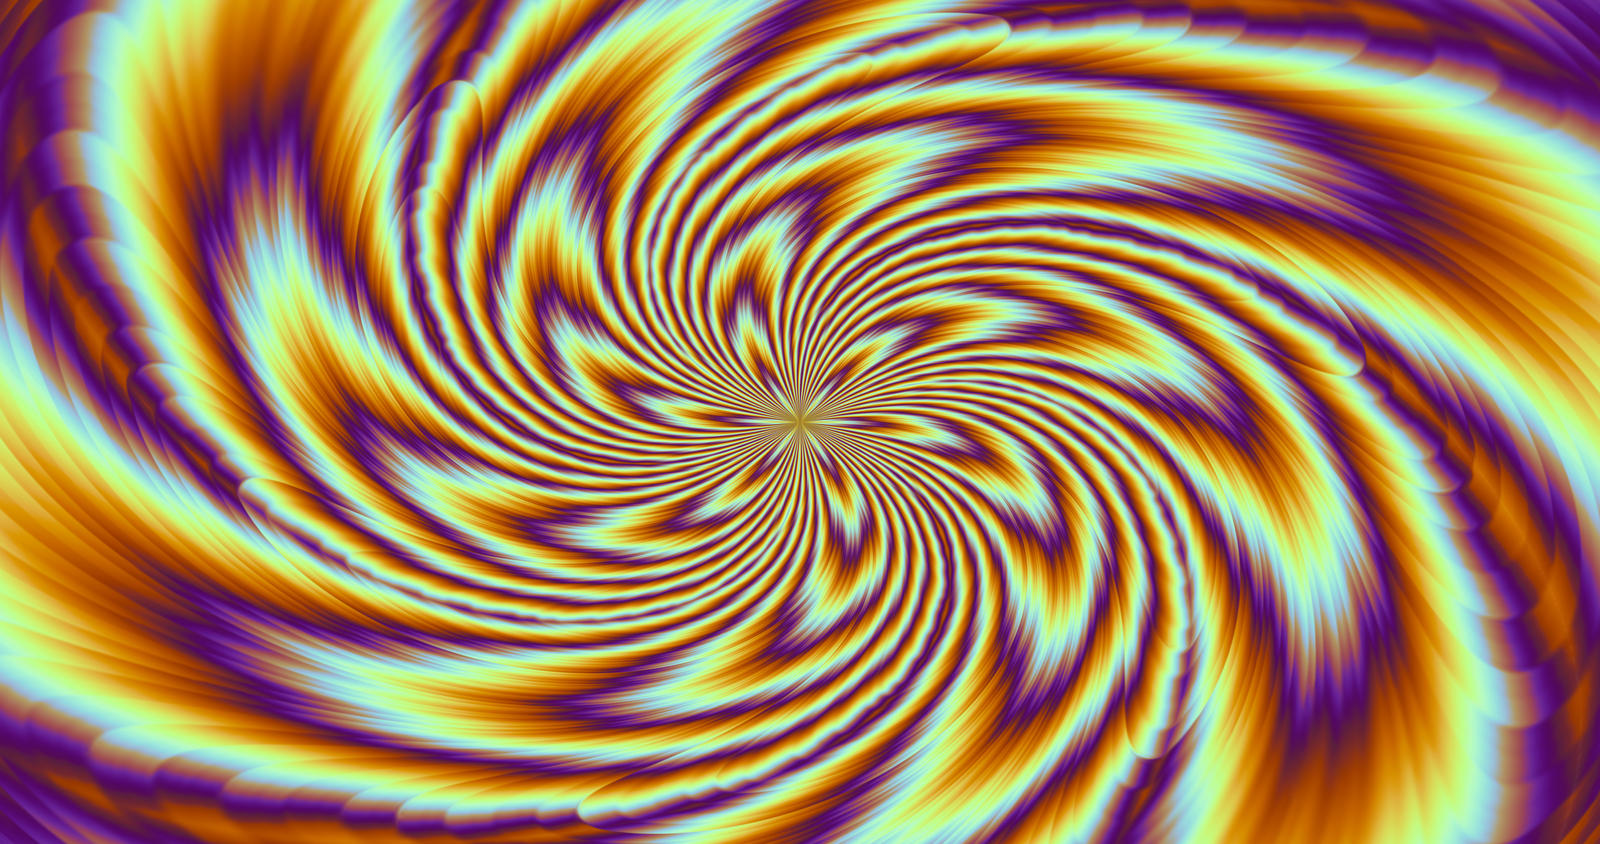 Contraction - Peripheral Drift Illusion by H-Flaieh on DeviantArt